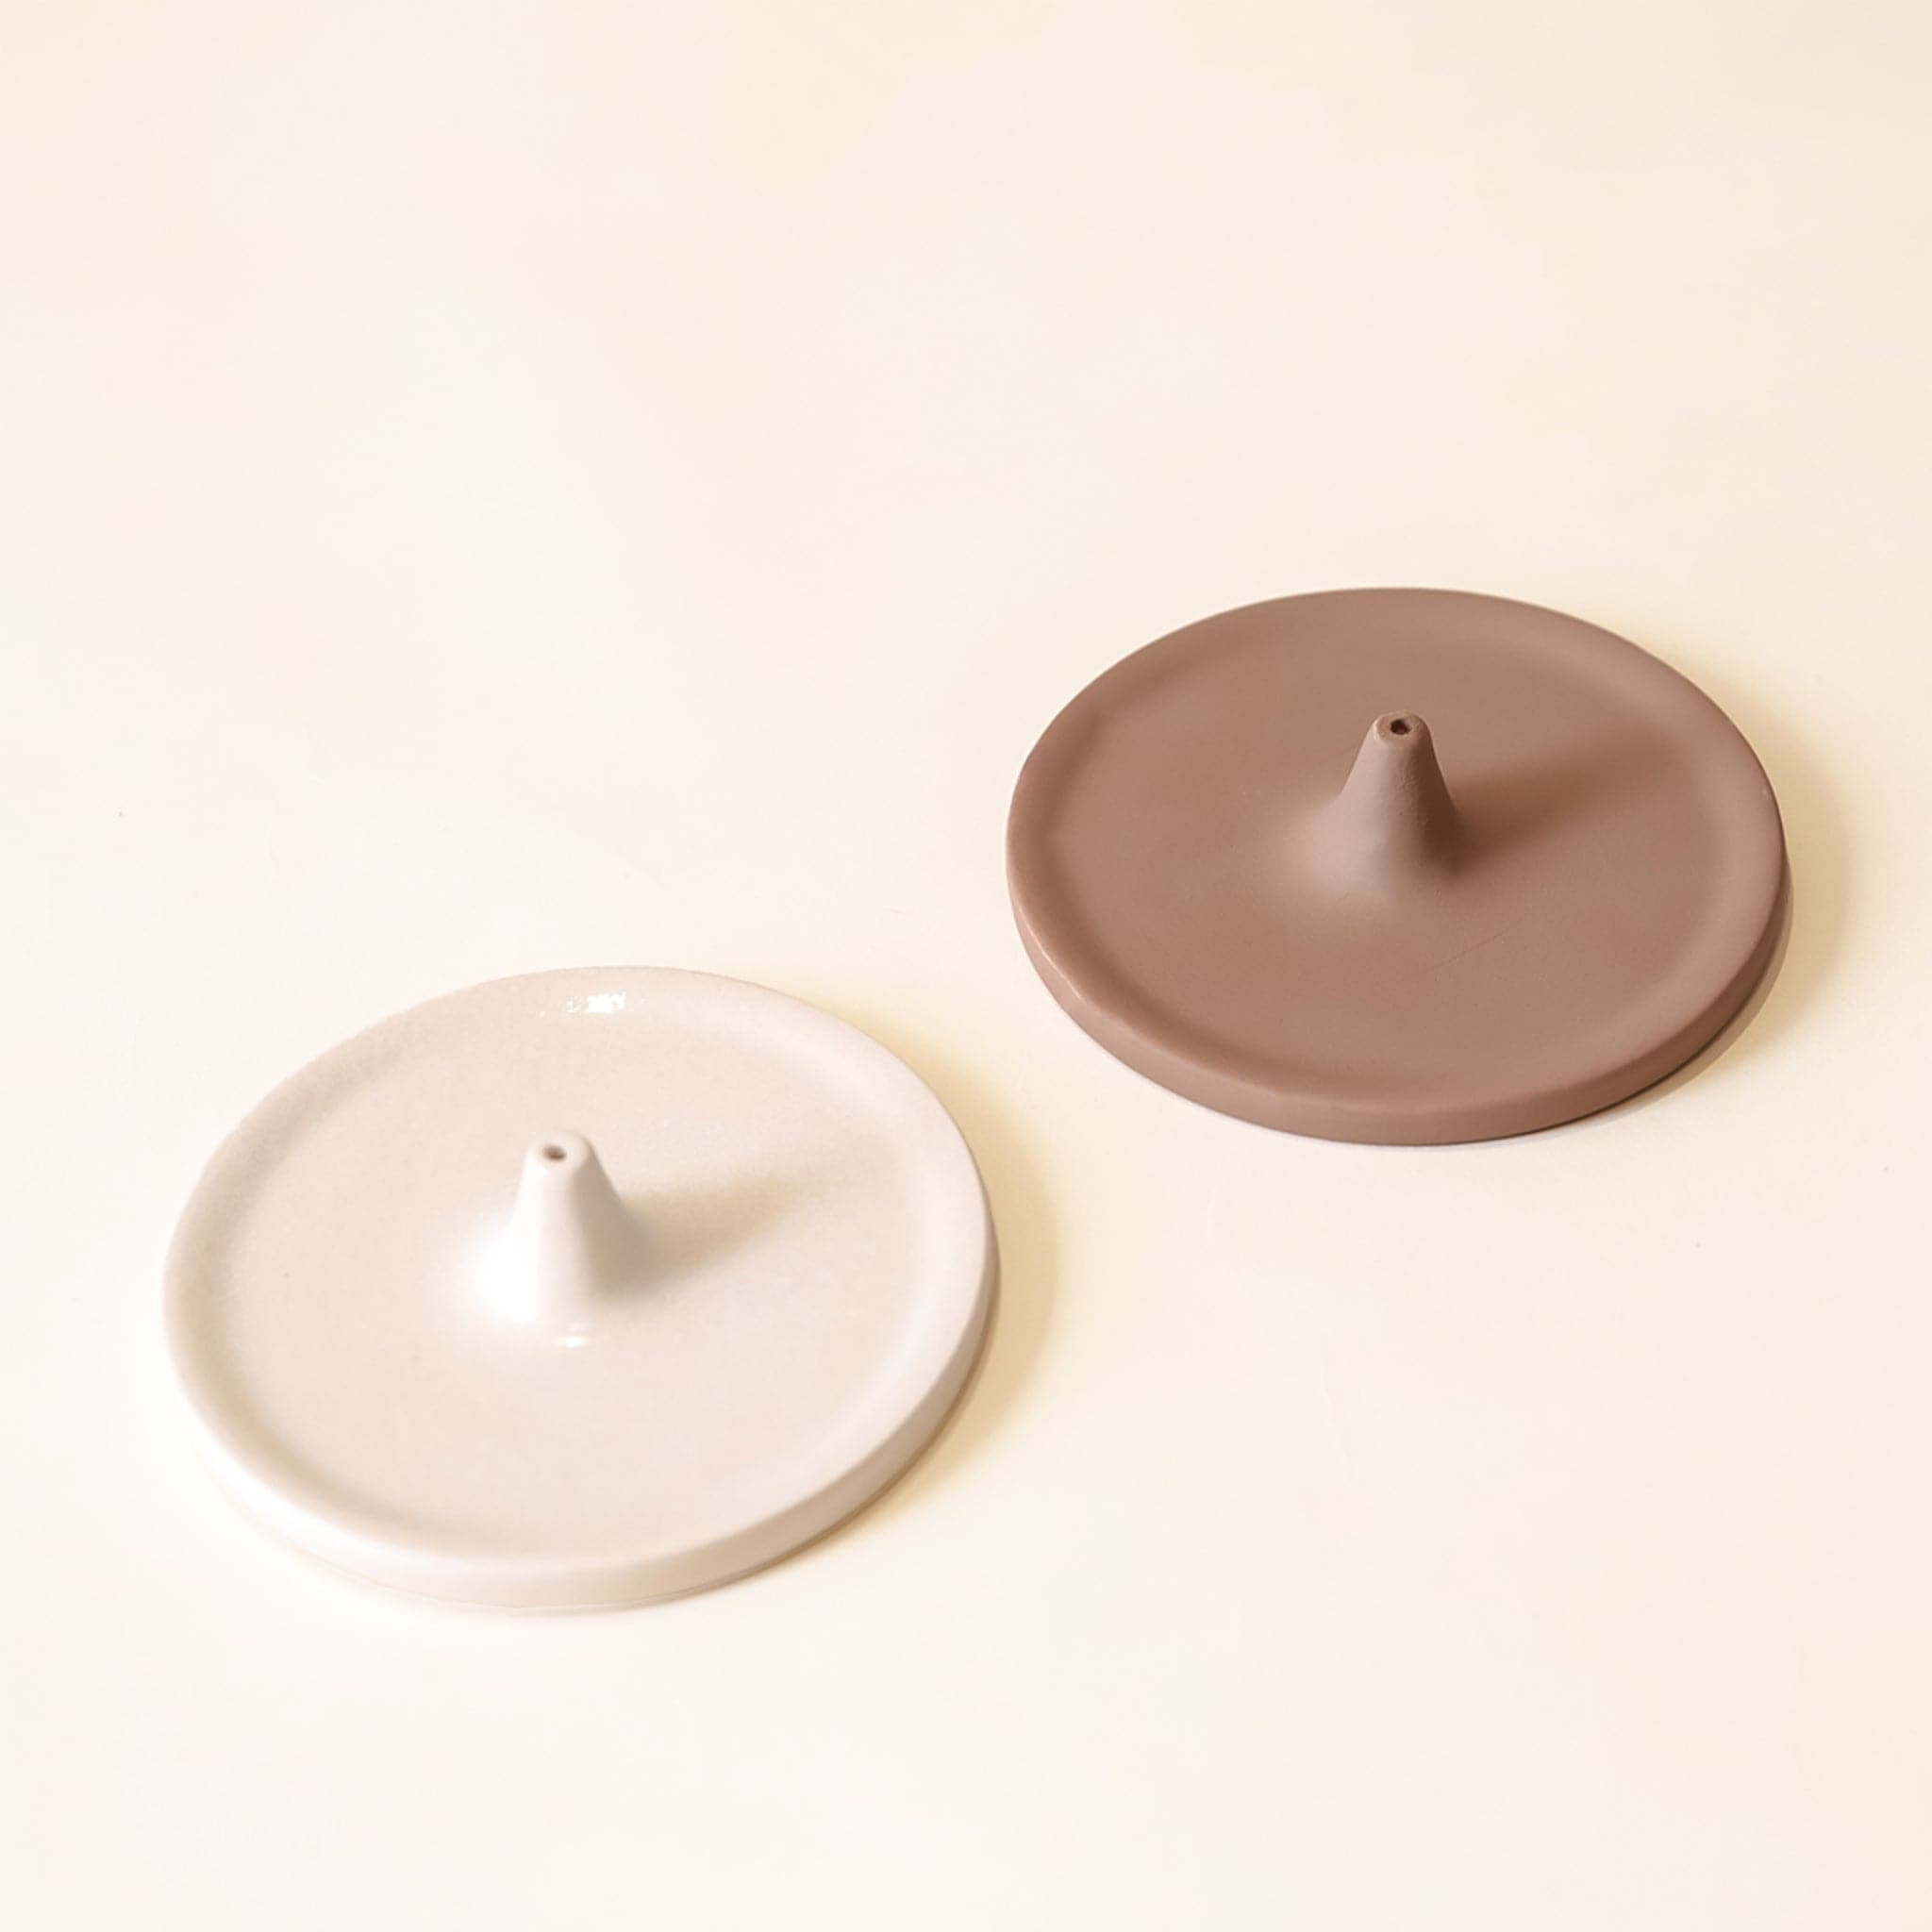 Two separate incense holders. They have a circular shape with a point in the center that is raised with a hole to place your incense in. There is a creamy white and a brown option.